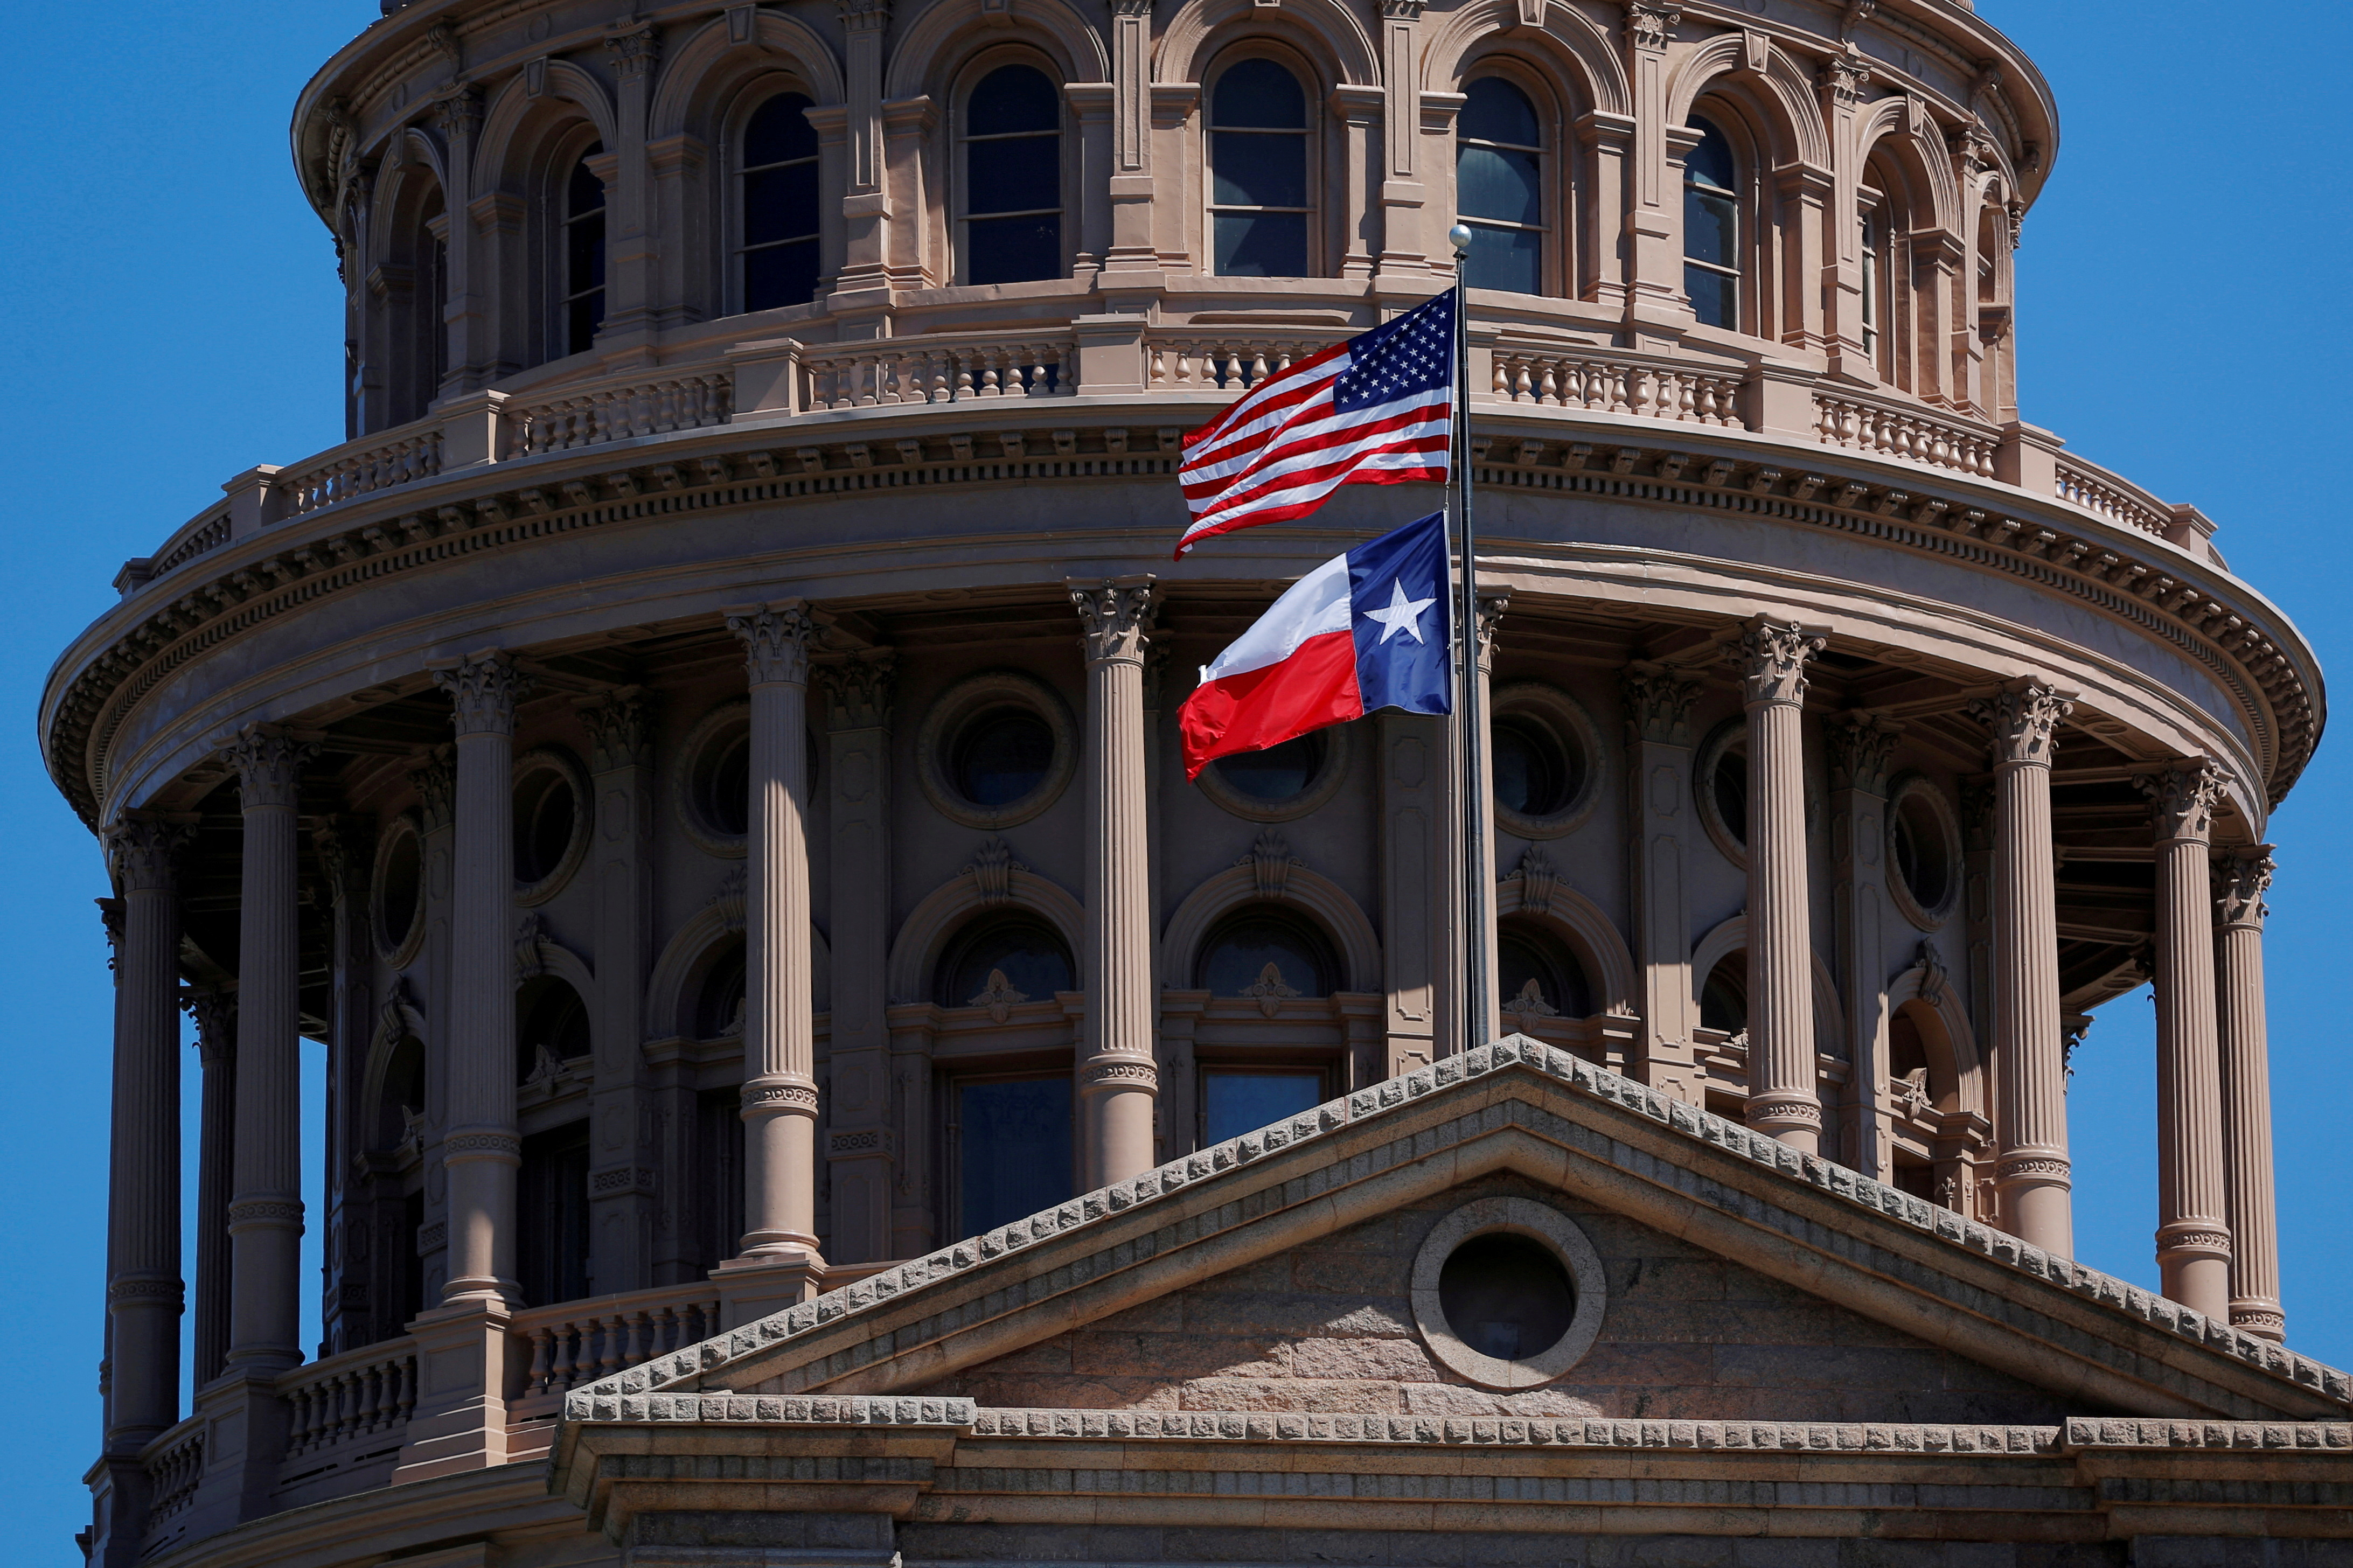 The U.S flag and the Texas State flag fly over the Texas State Capitol in Austin